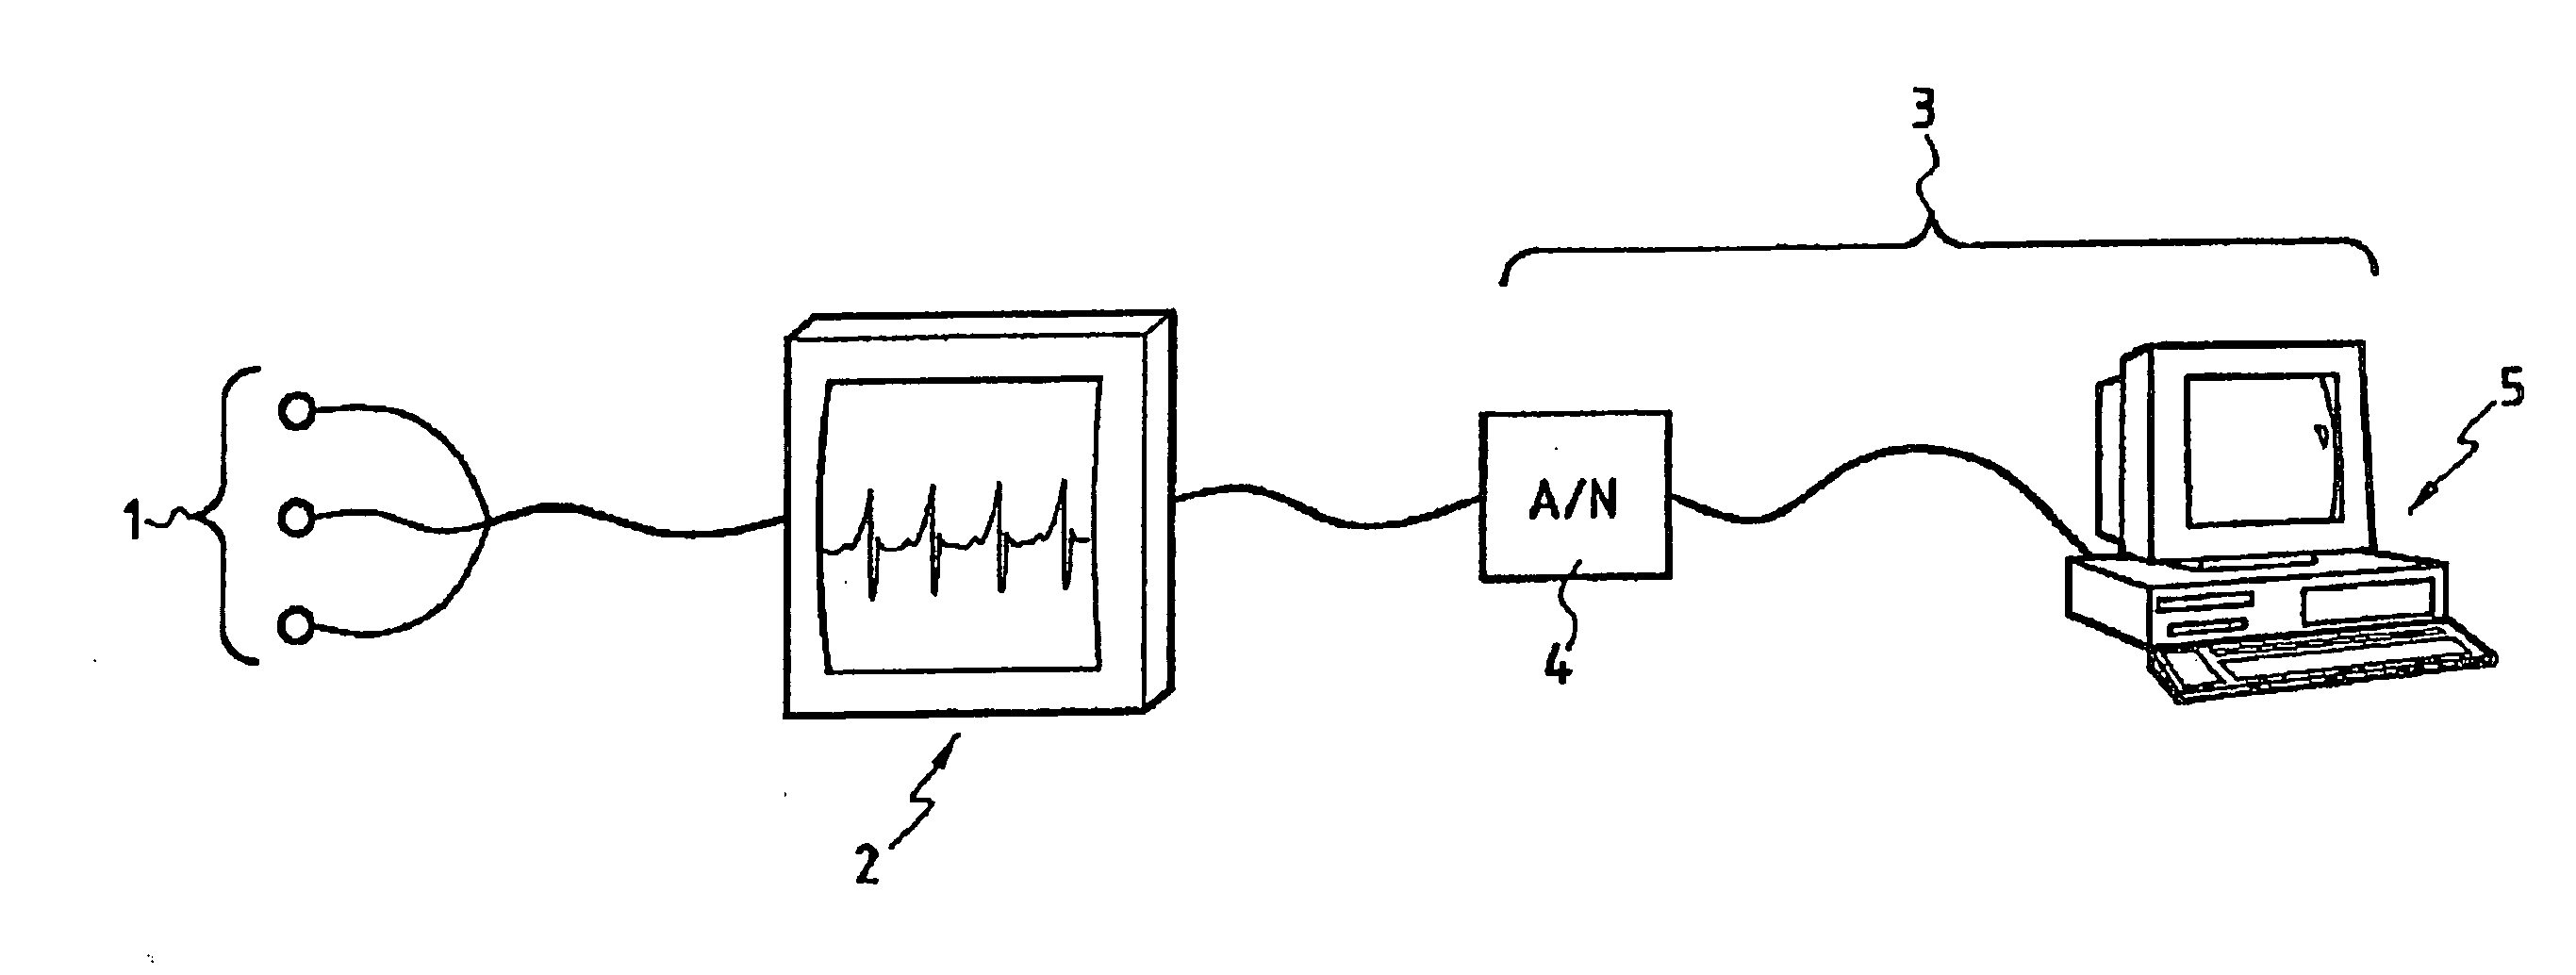 Method For Processing A Series Of Cardiac Rhythm Signals (Rr) And The Use Thereof For Analysing A Cardiac Rhythm Variability, In Particular For Assessing A Patient's Pain Or Stress